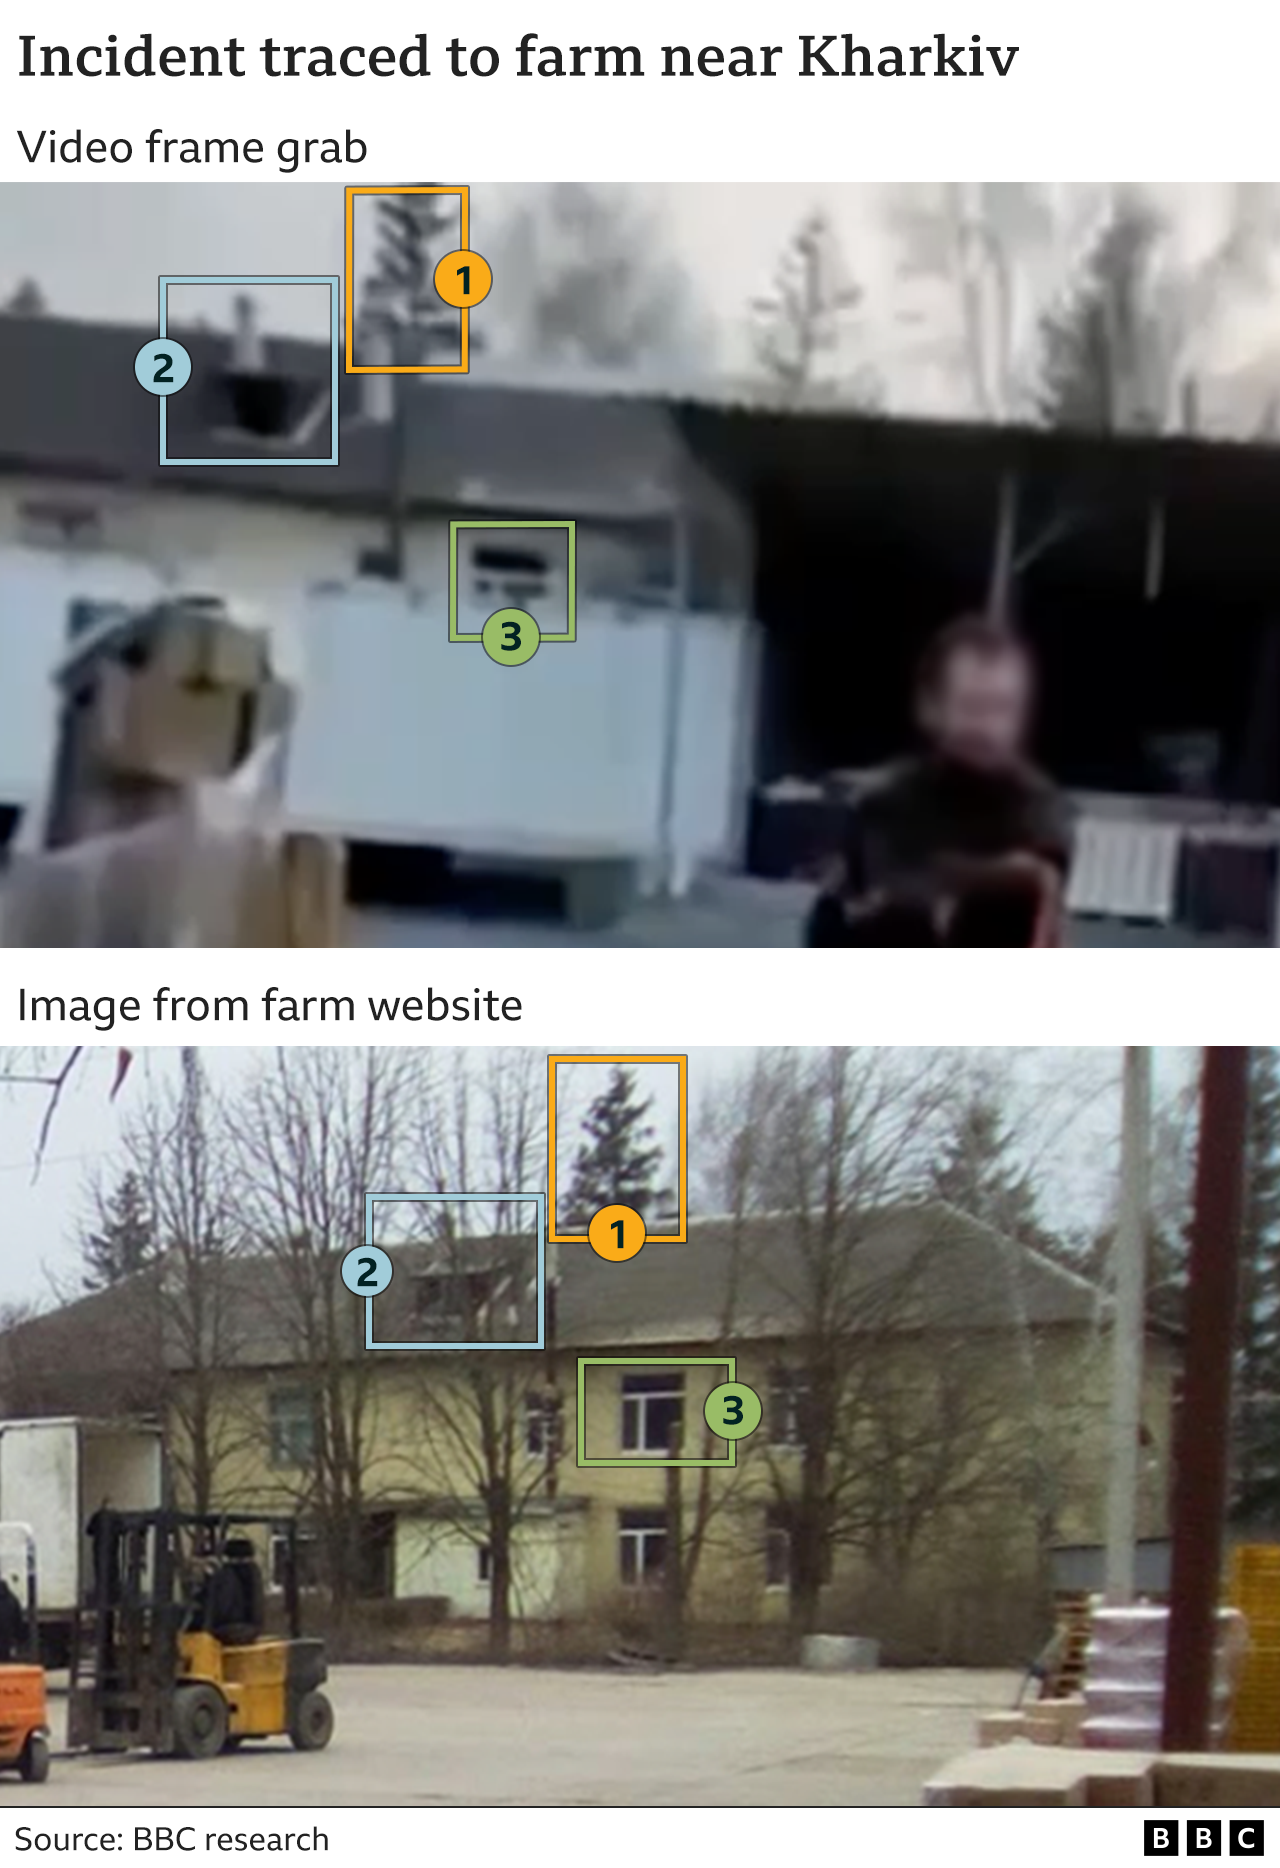 Image of the farm from open source images confirming its location